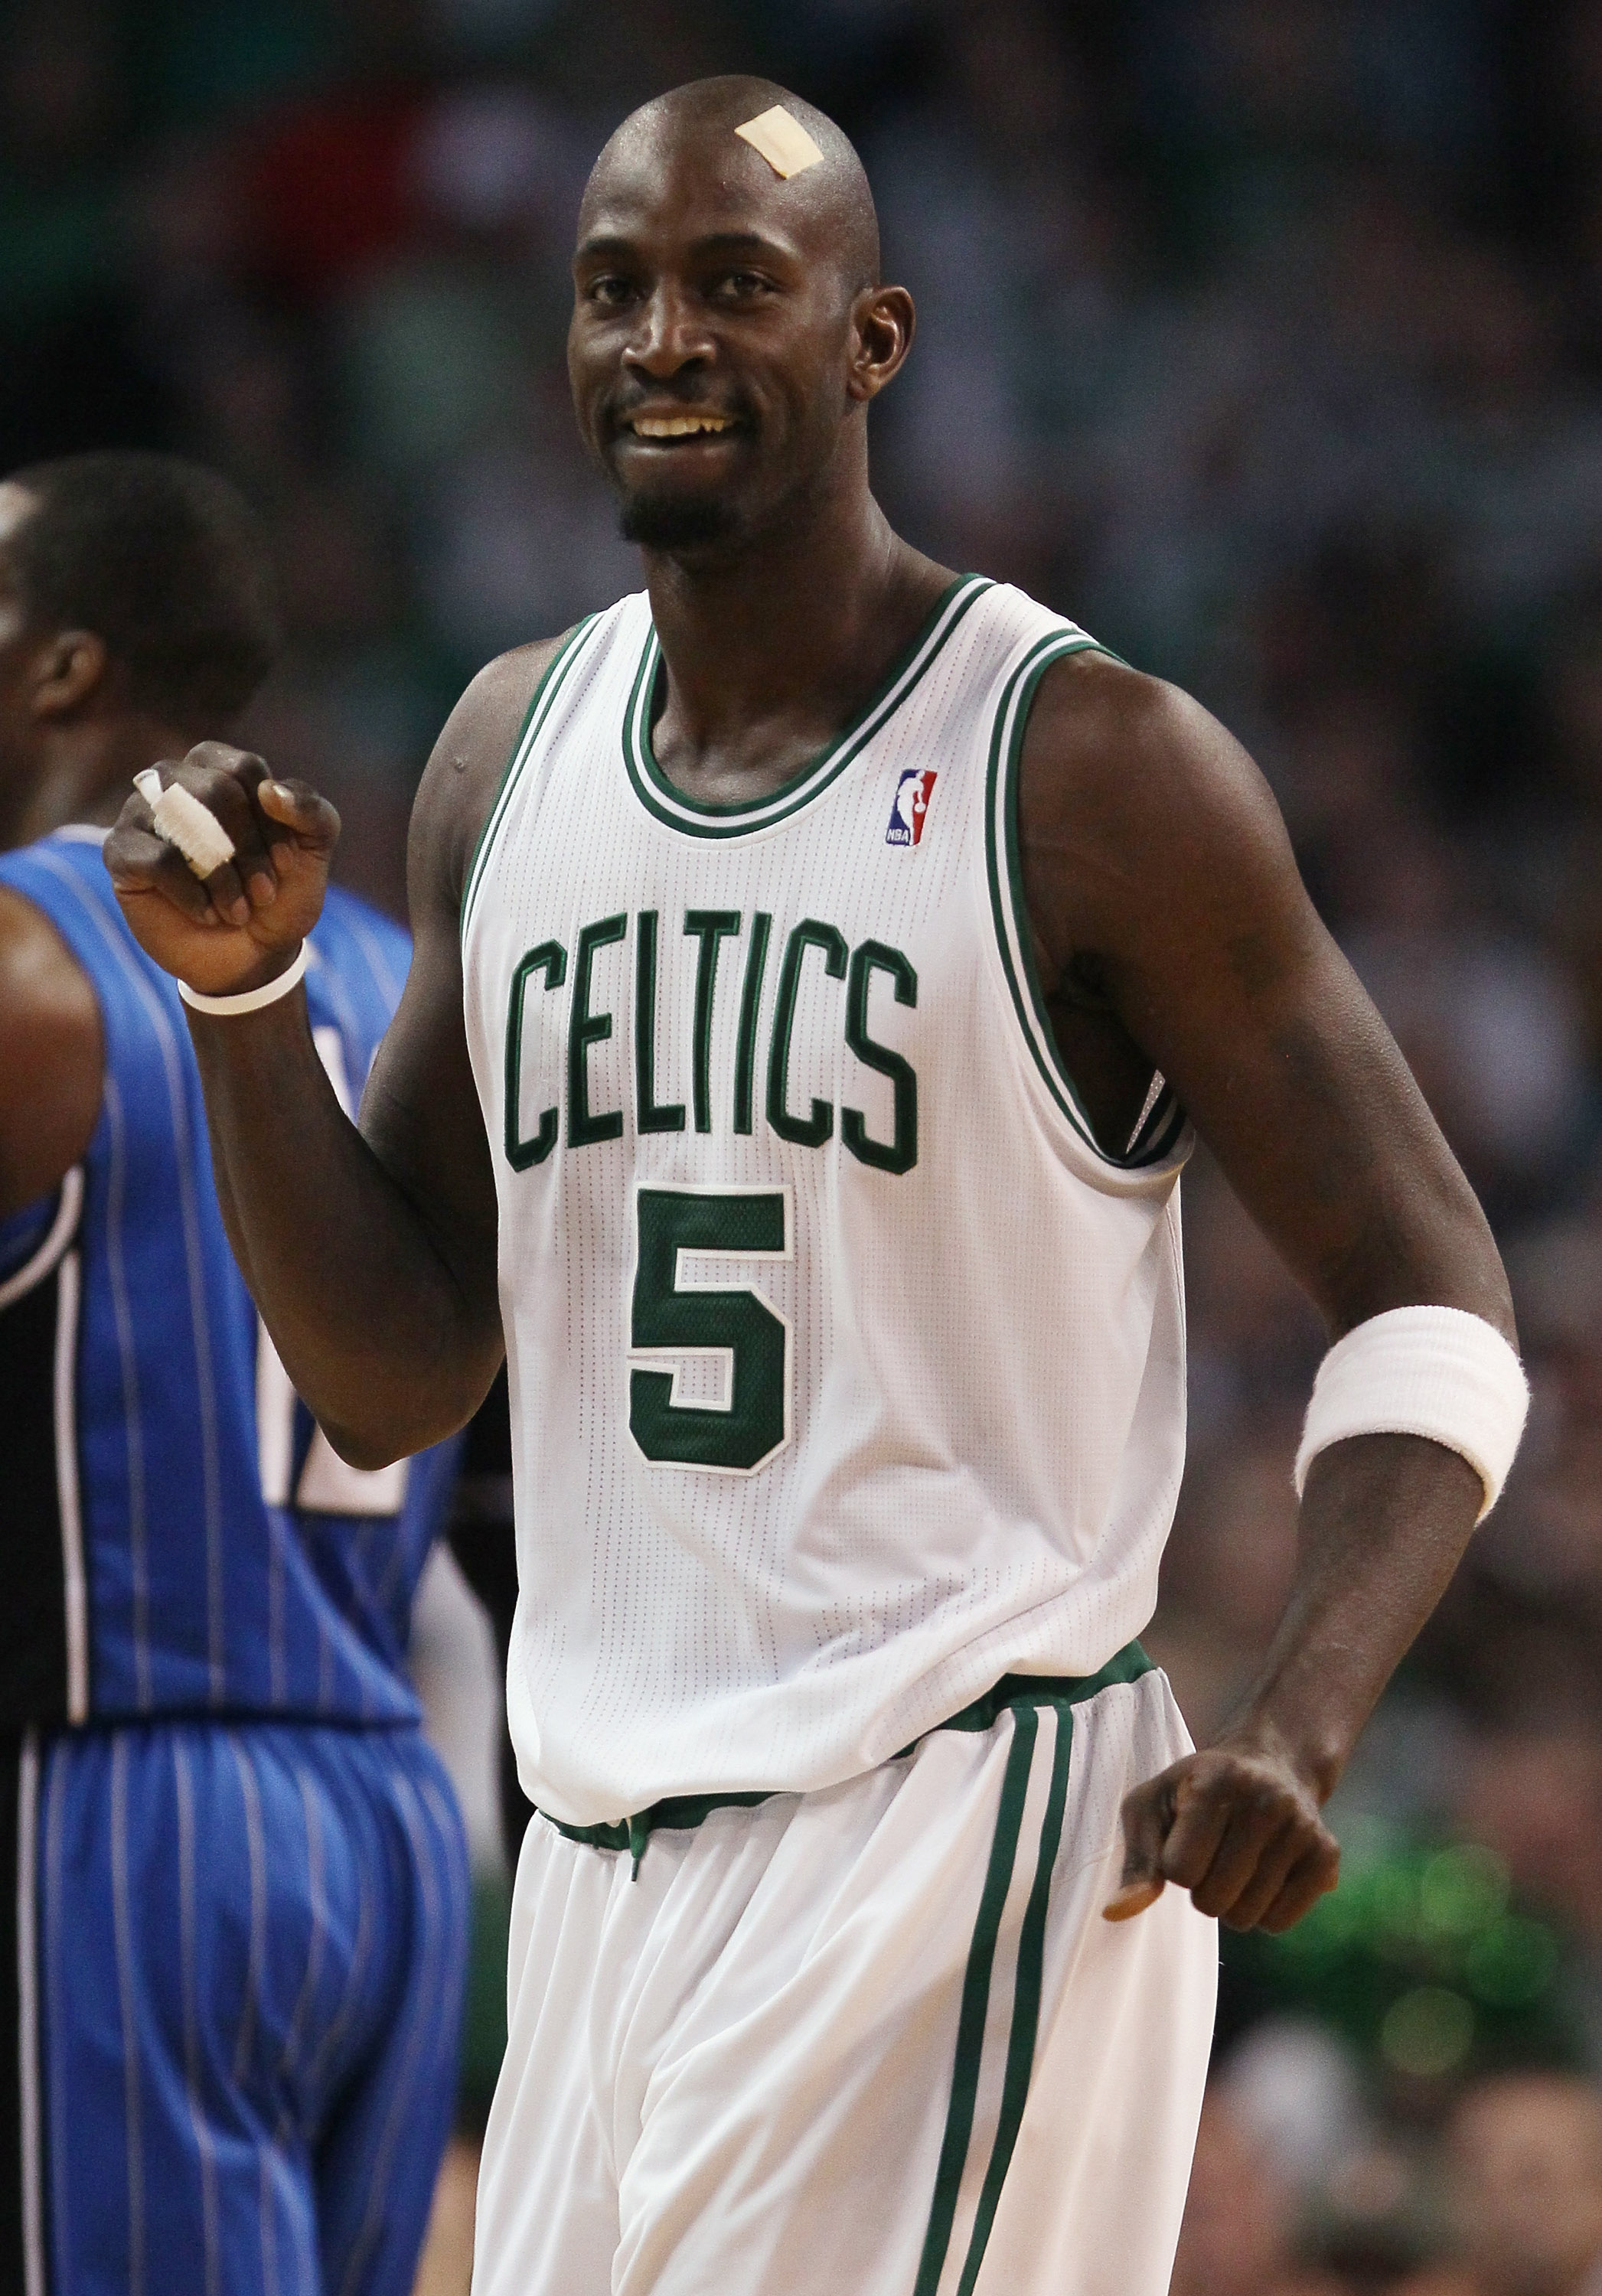 BOSTON, MA - FEBRUARY 06:  Kevin Garnett #5 of the Boston Celtics celebrates in the first half against the Orlando Magic on February 6, 2011 at the TD Garden in Boston, Massachusetts. The Celtics defeated the Magic 91-80. NOTE TO USER: User expressly ackn